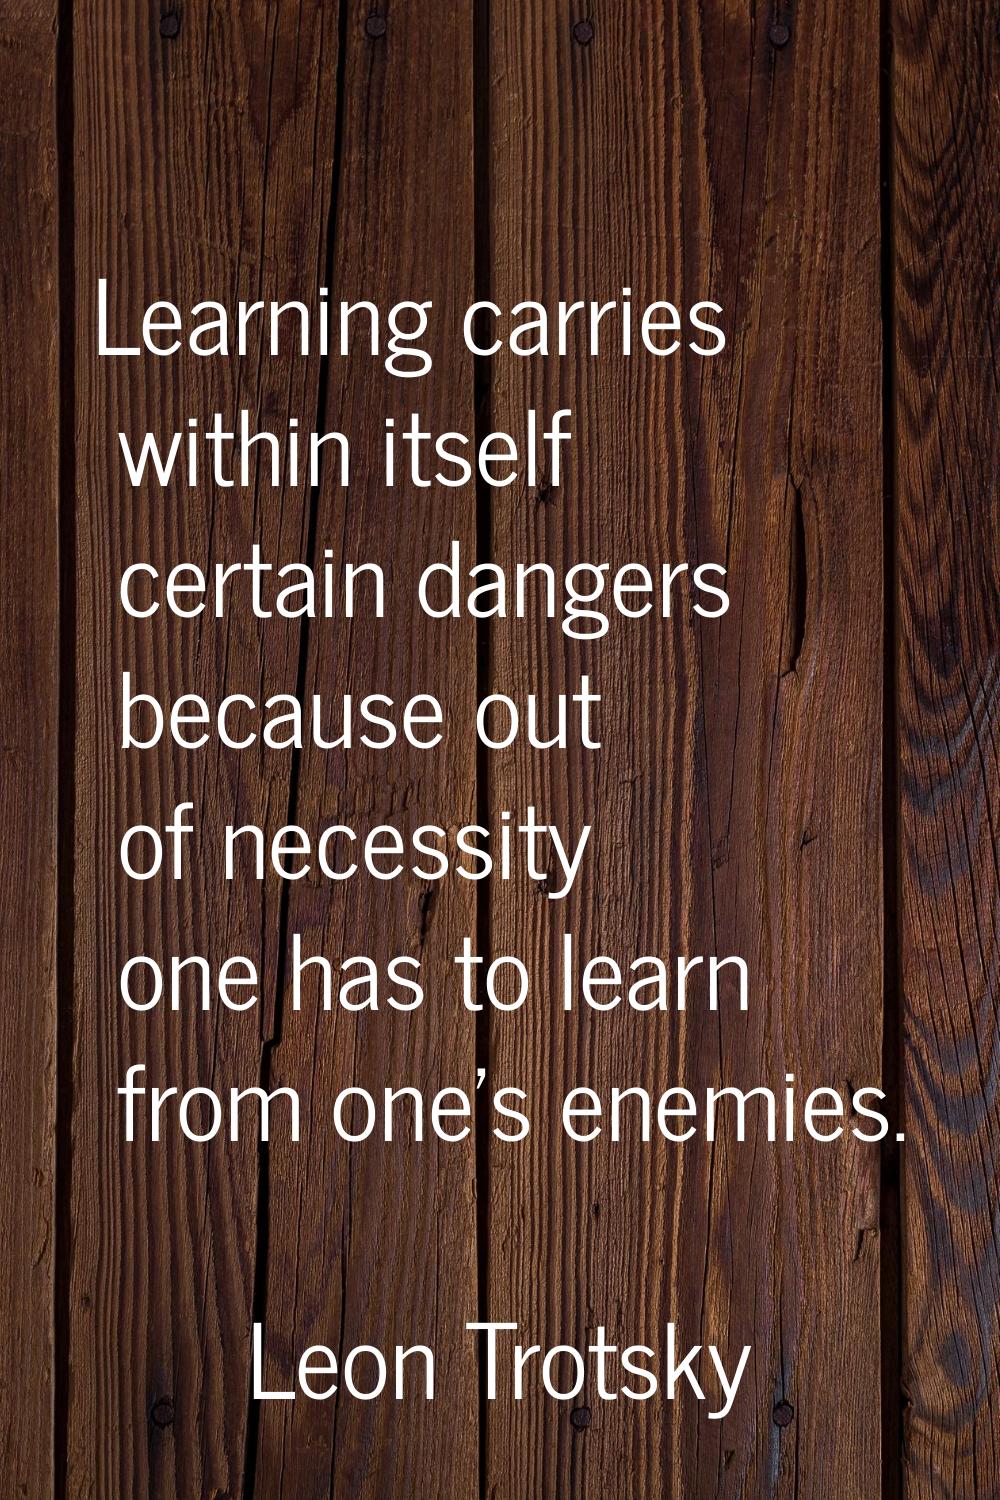 Learning carries within itself certain dangers because out of necessity one has to learn from one's